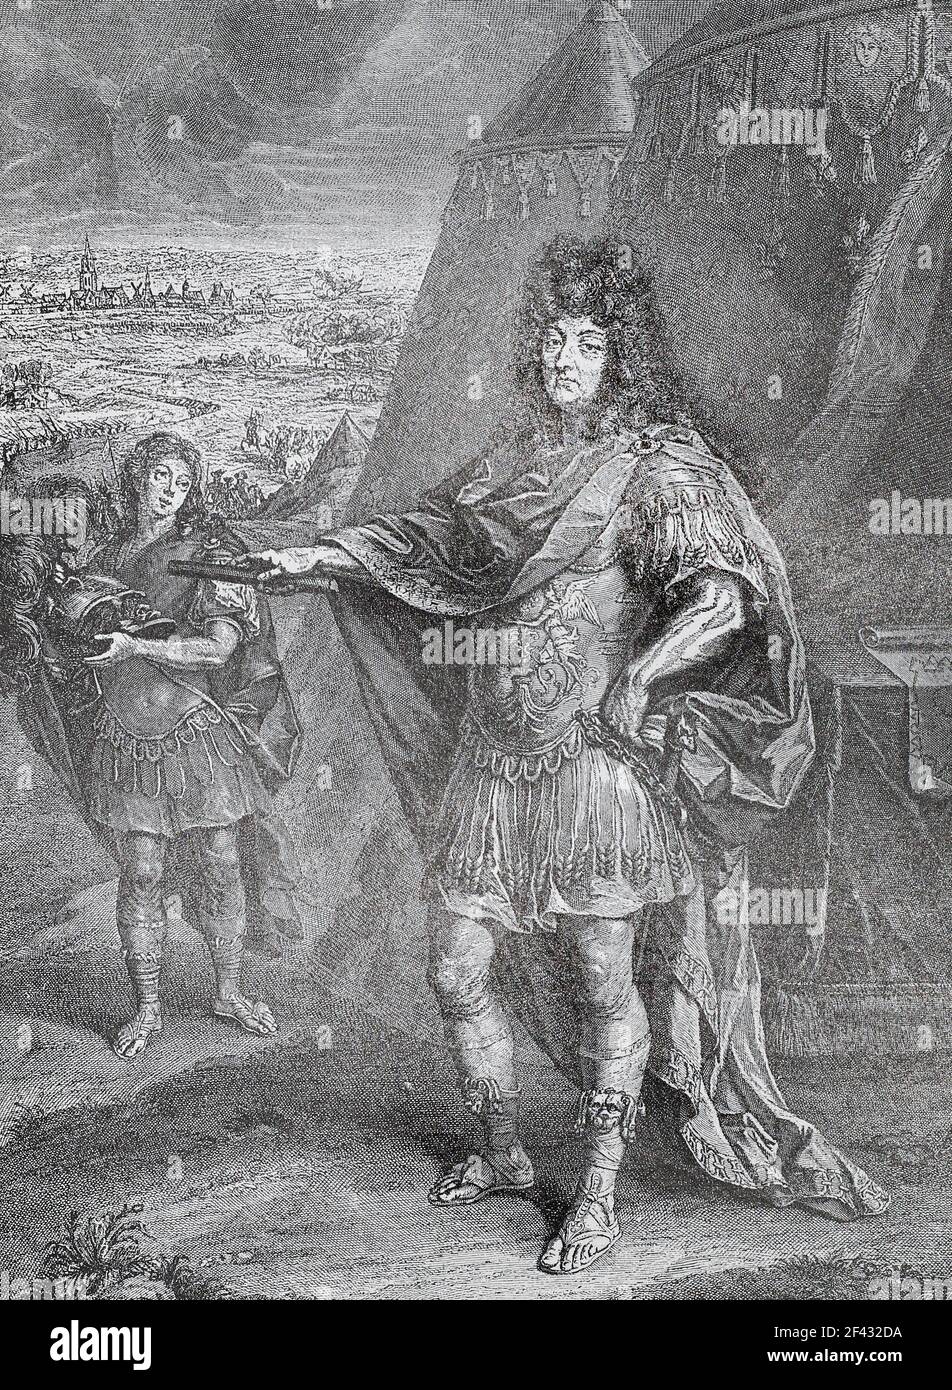 King of France Louis XIV. Engraving of 1694. Louis XIV (Louis Dieudonné; 5 September 1638 – 1 September 1715), also known as Louis the Great (Louis le Grand) or the Sun King (le Roi Soleil), was King of France from 14 May 1643 until his death in 1715. His reign of 72 years and 110 days is the longest recorded of any monarch of a sovereign country in European history. Louis XIV's France was emblematic of the age of absolutism in Europe. Stock Photo